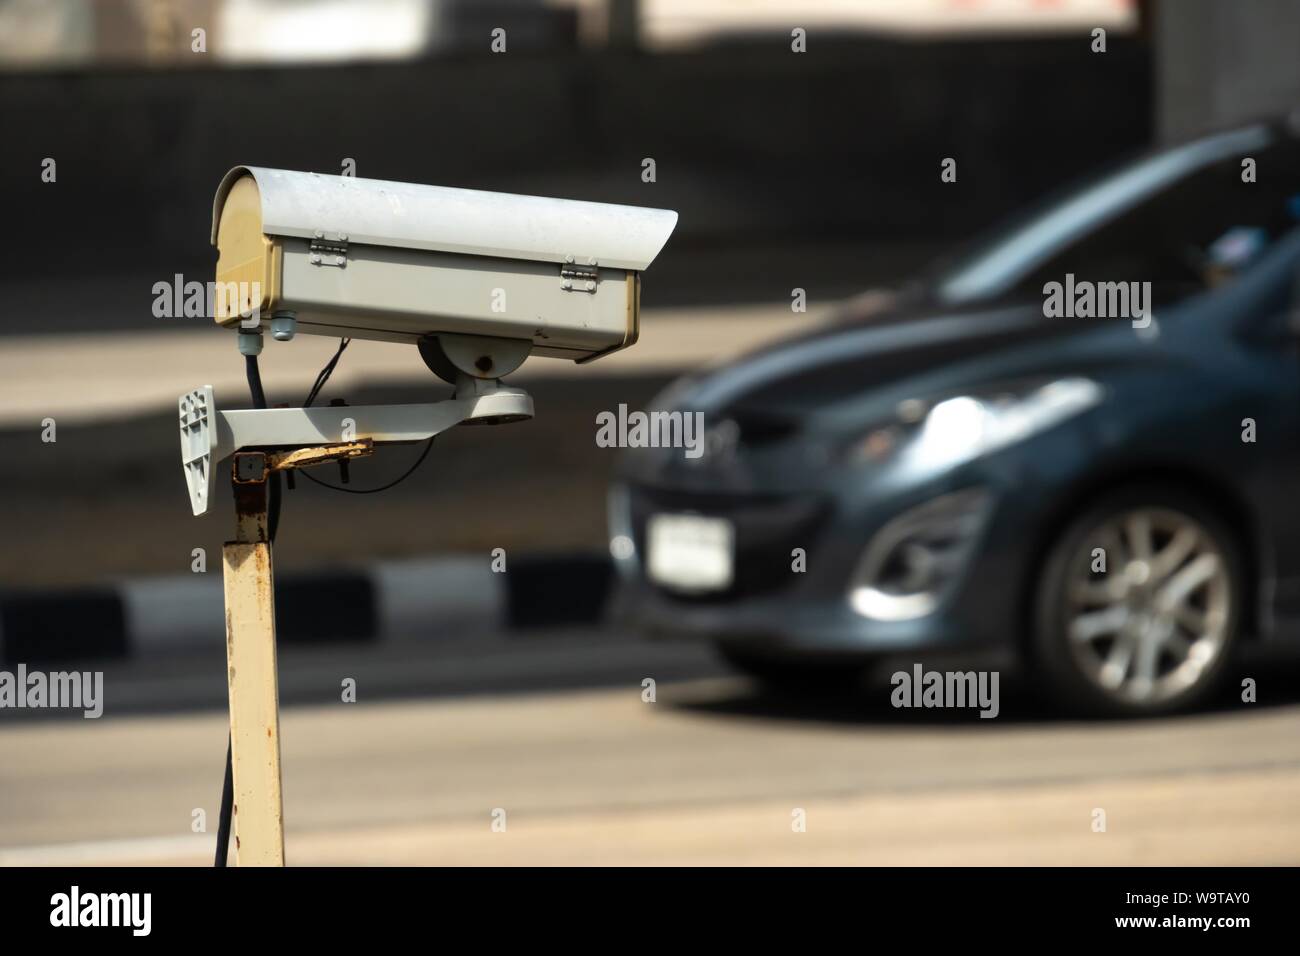 security monitoring CCTV camera mounted on old pole steel post. Stock Photo